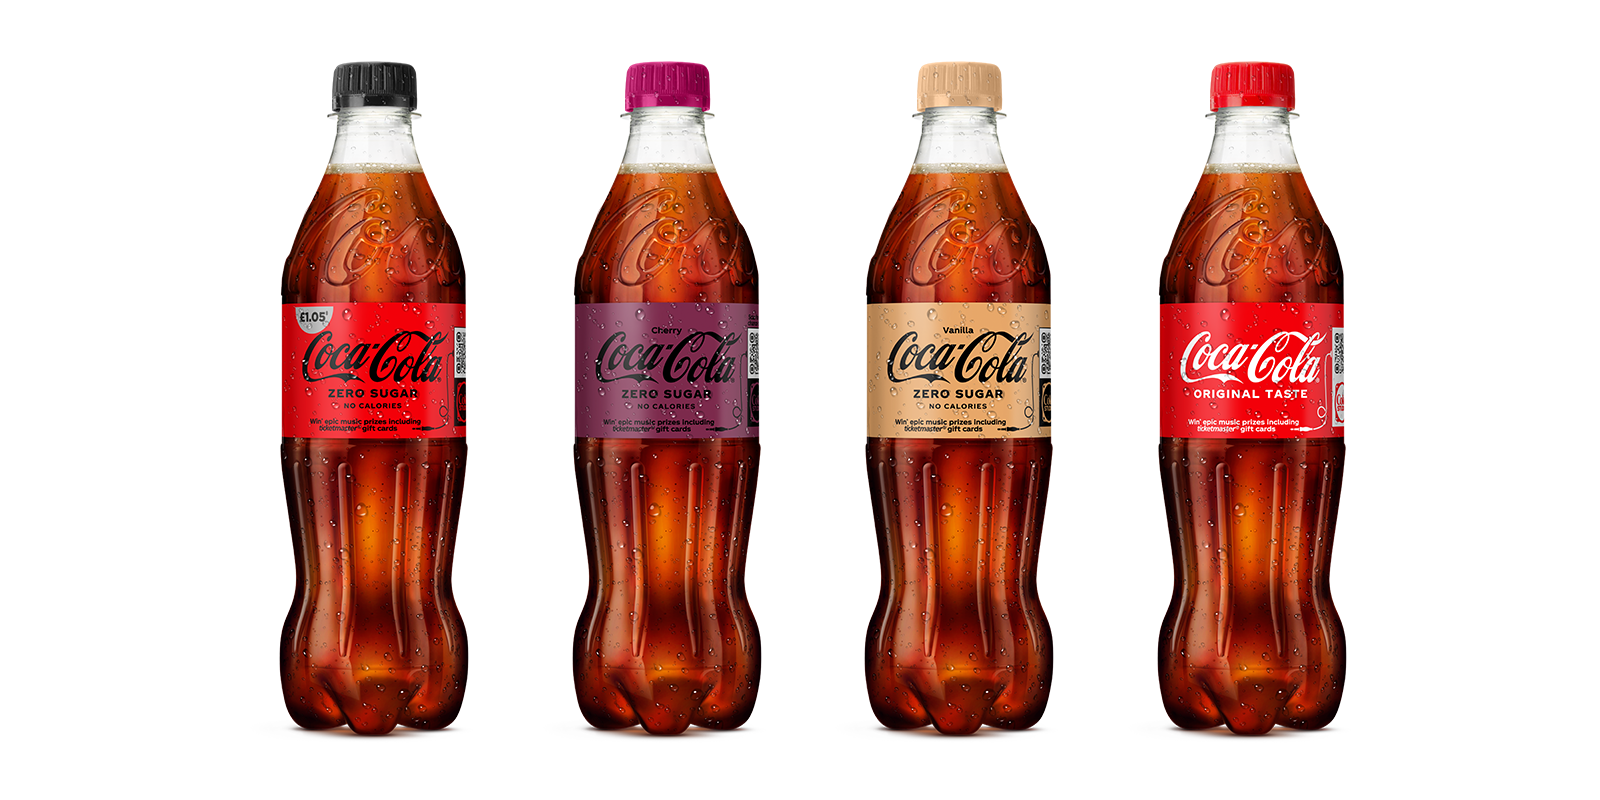 Coca-Cola rewards music fans this summer with new on-pack promotion